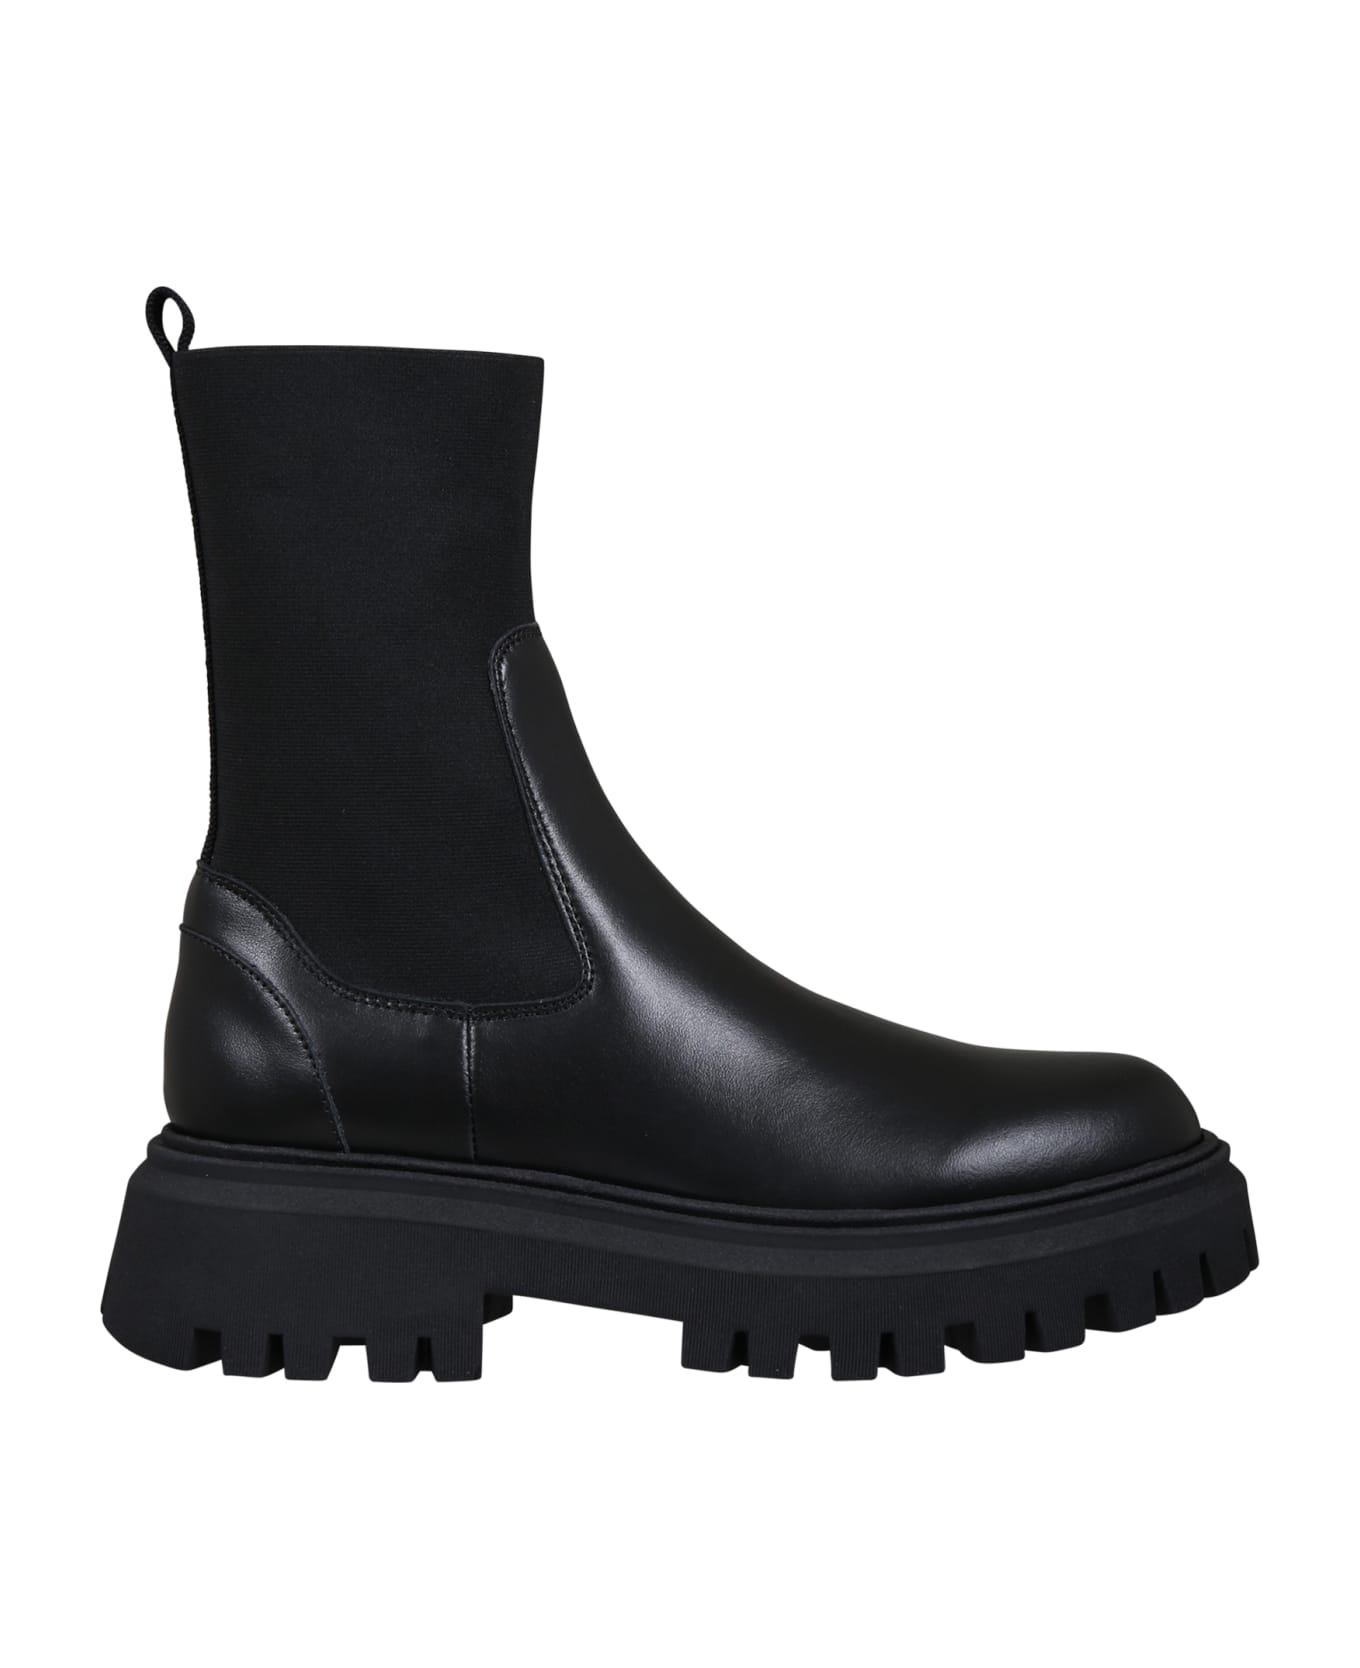 Moncler Black Boots For Girl With Logo - Black